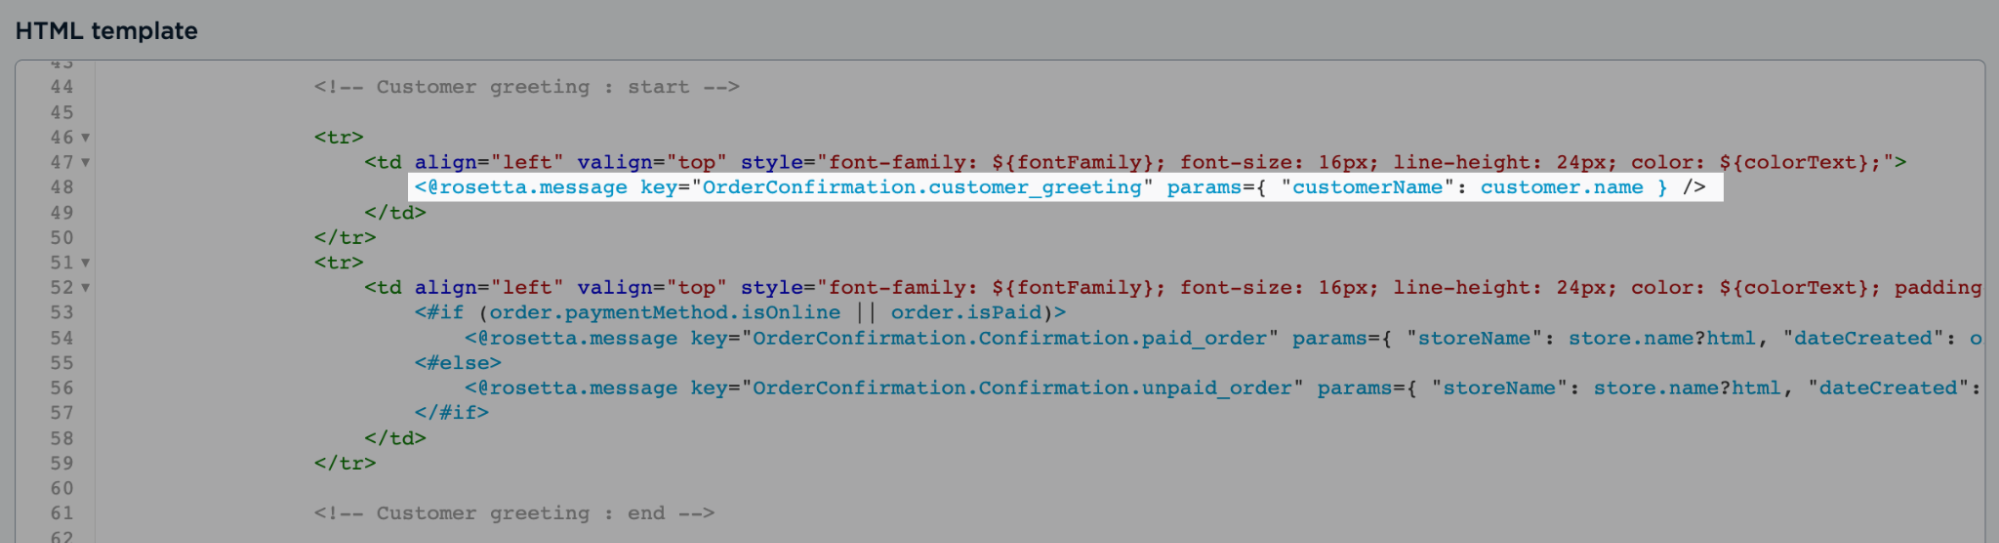 Customizing_email_templates_with_HTML_code__3_.png